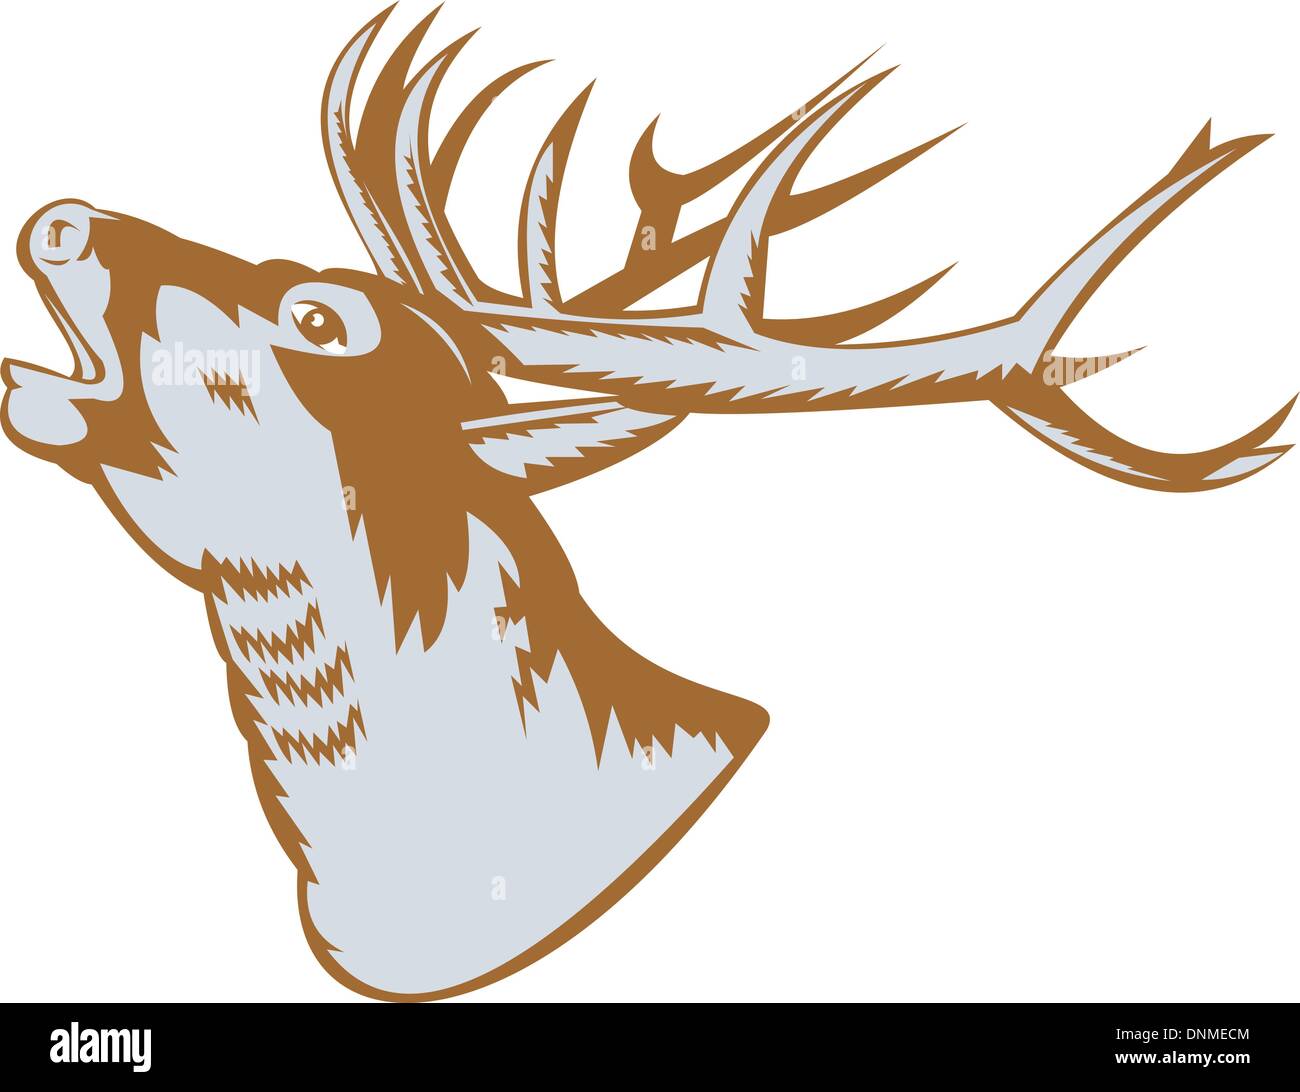 Illustration of a stag deer buck roaring on white background. Stock Vector